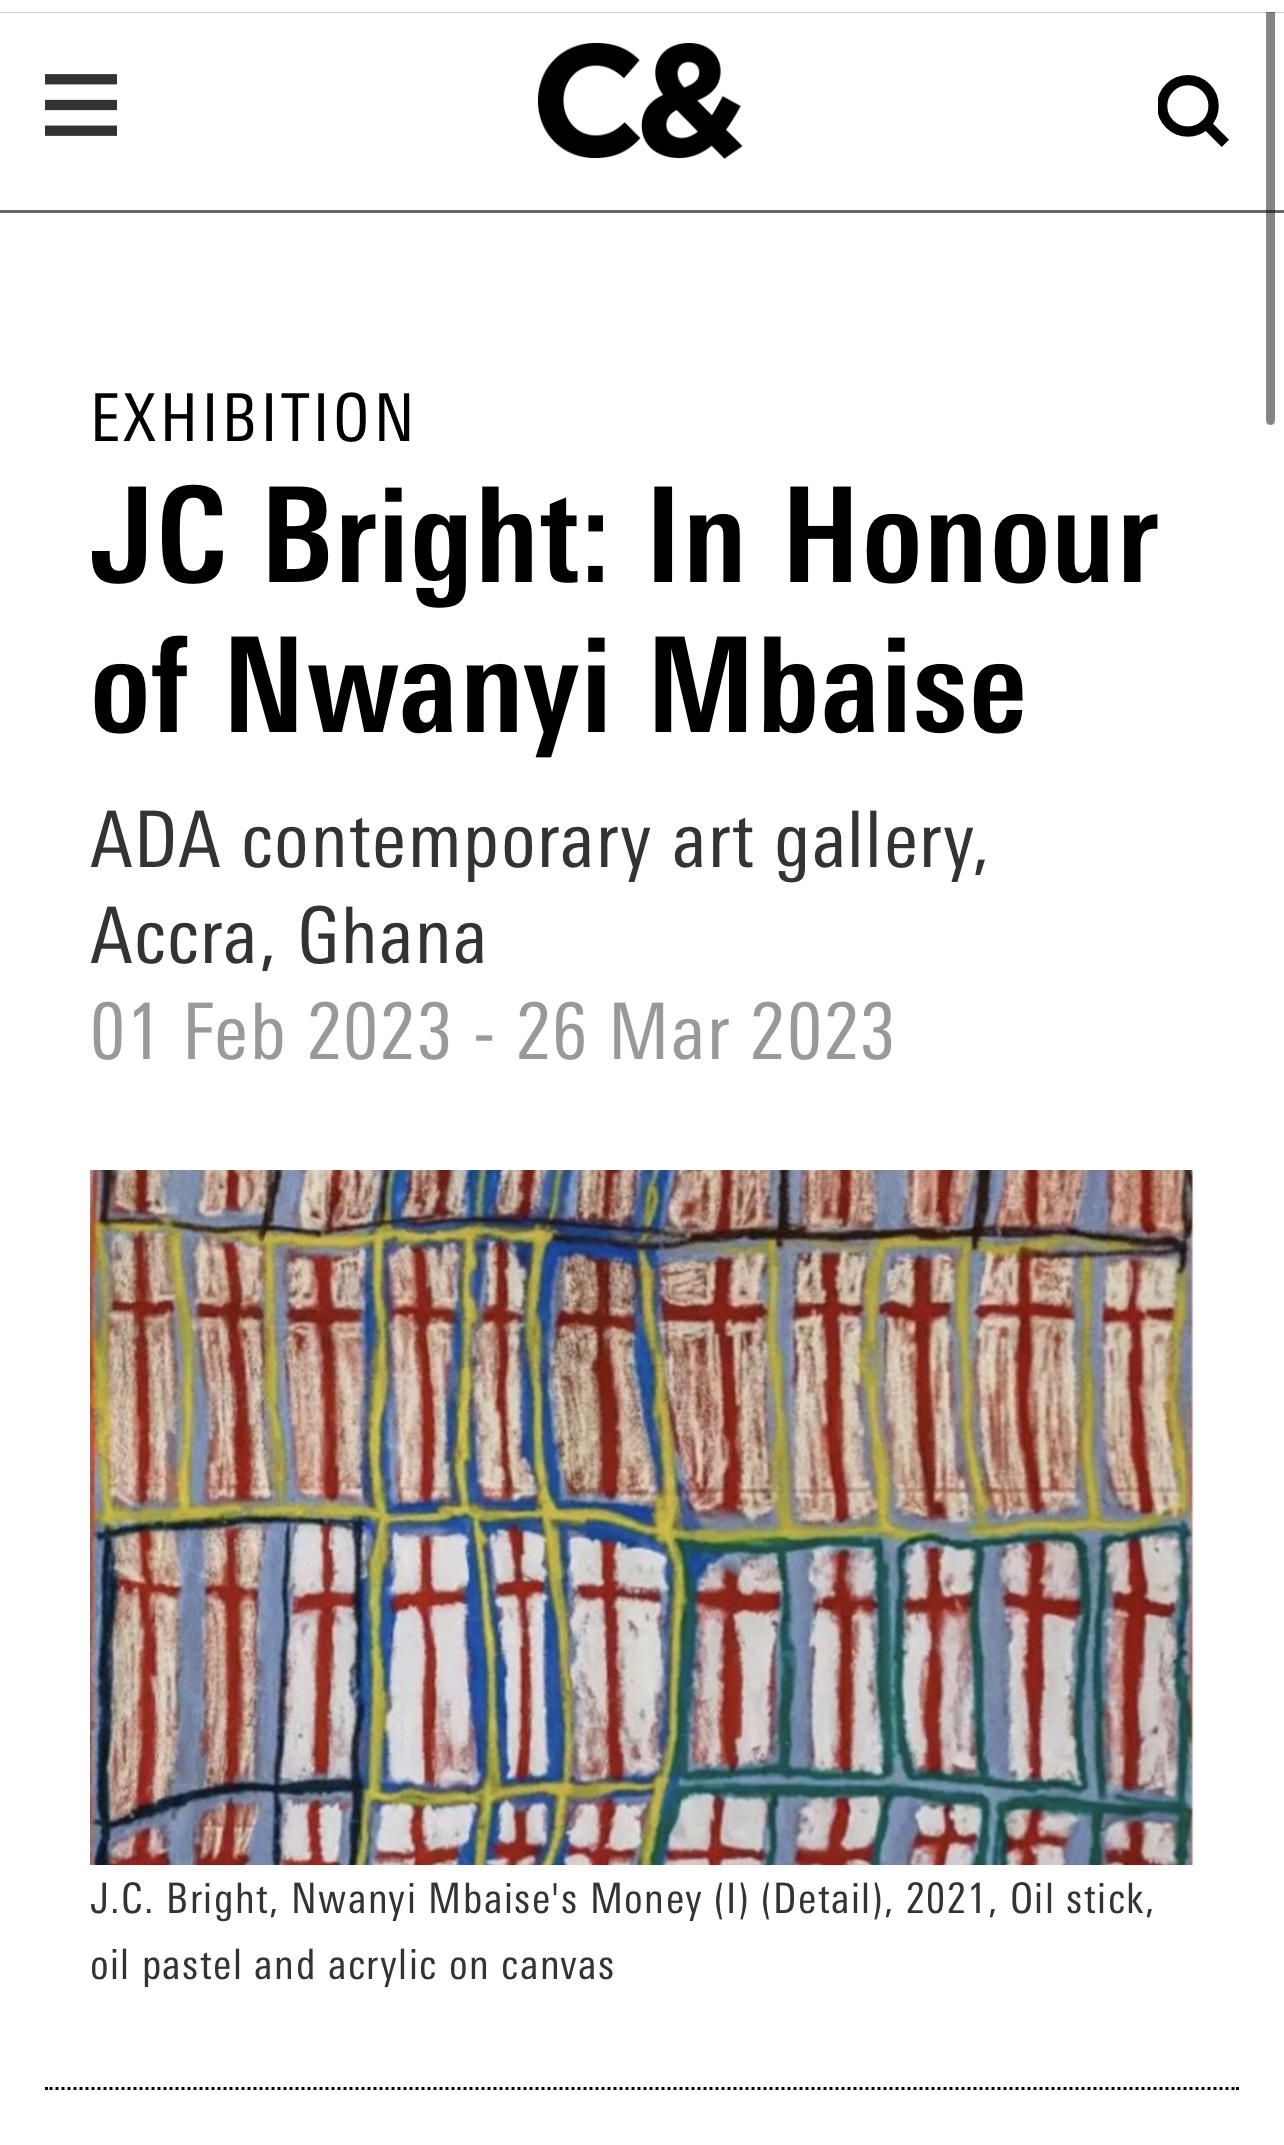 JC BRIGHT: IN HONOR OF NWANYI MBIASE